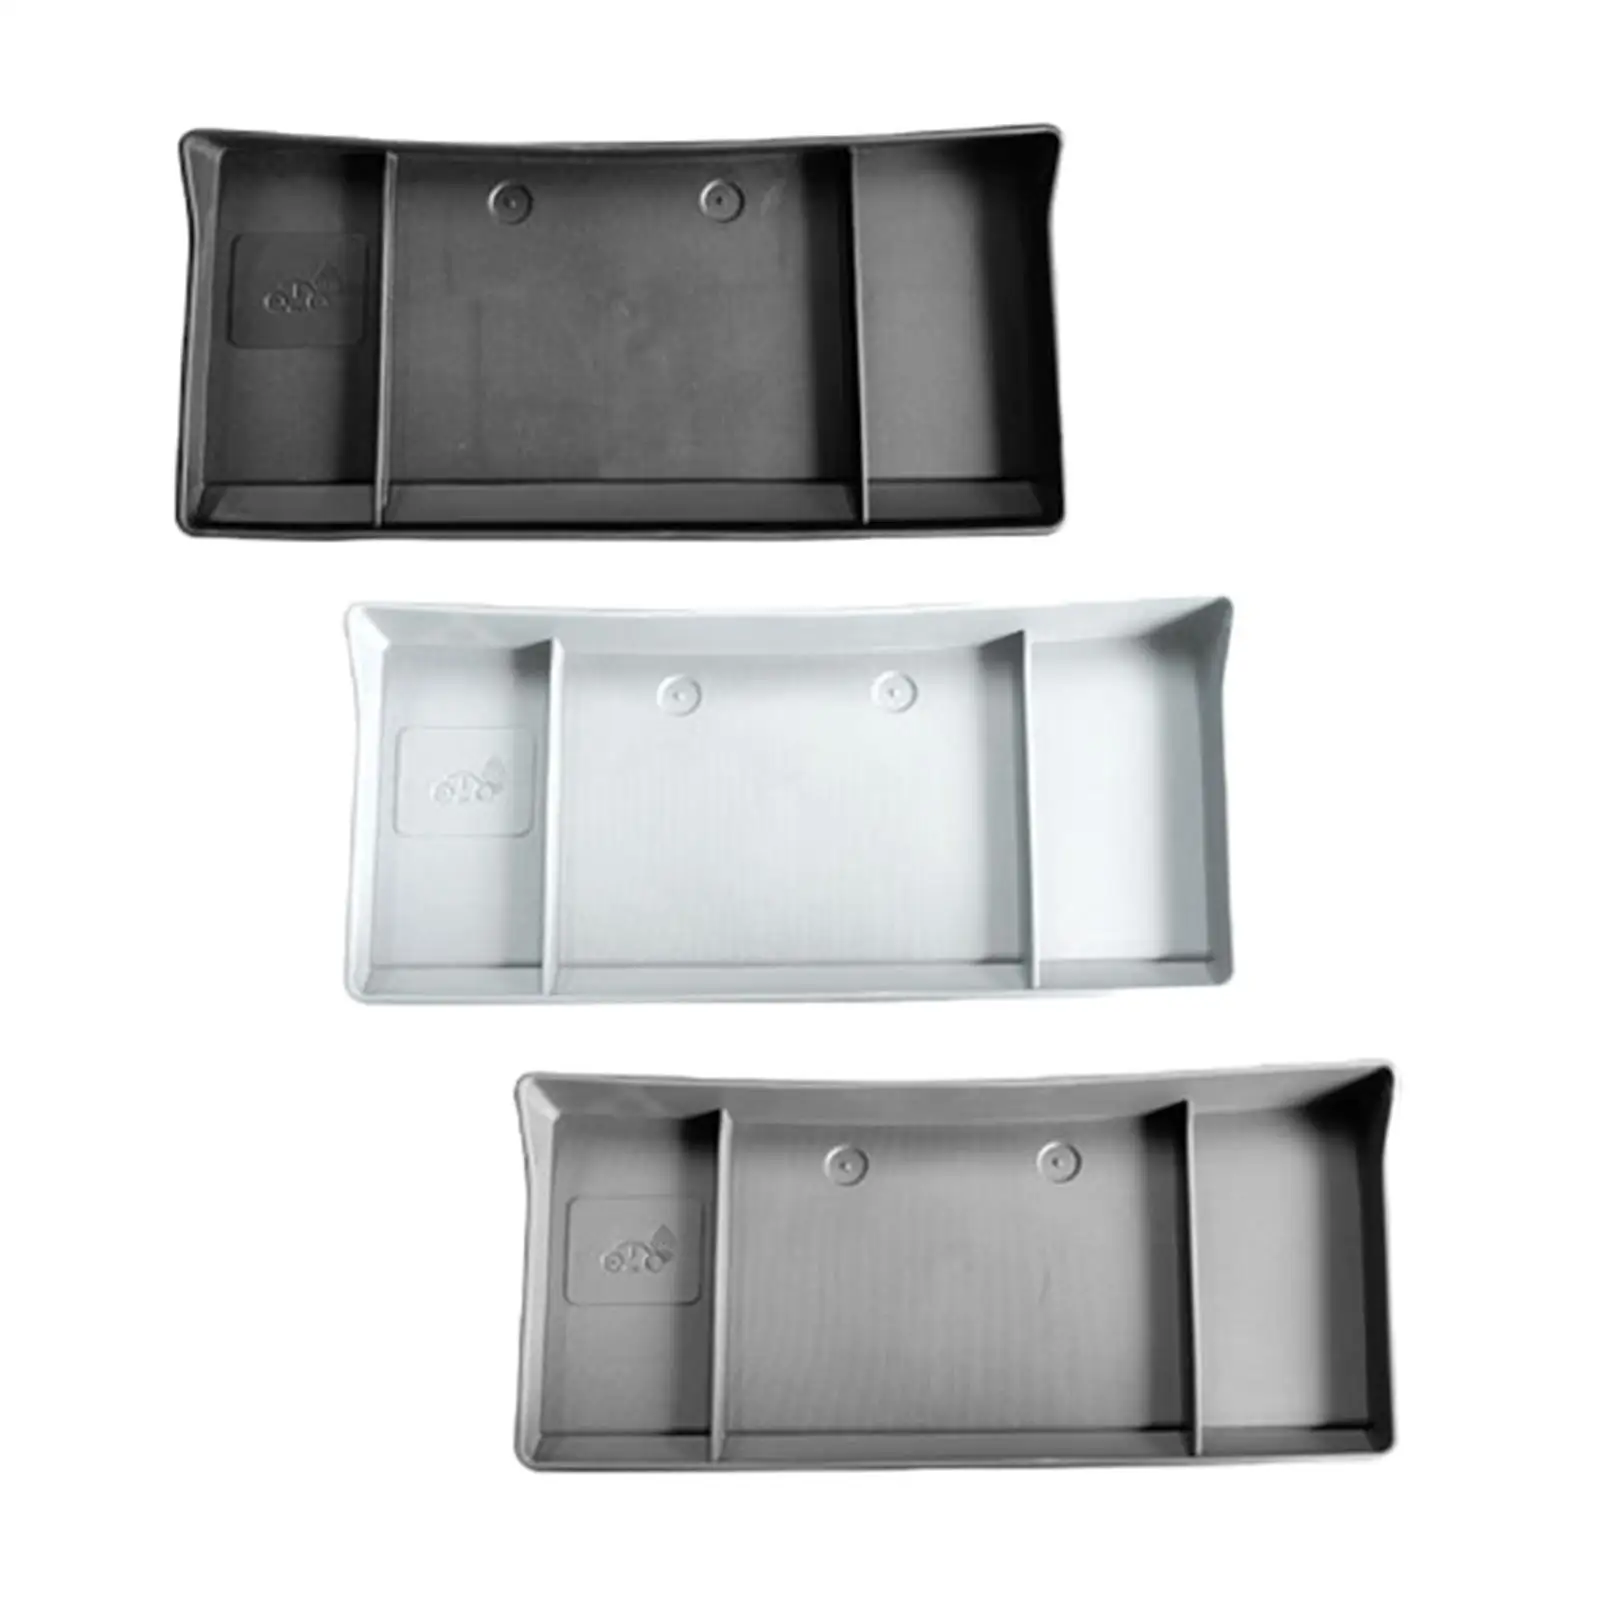 Center Screen Console Tray Organizer for Storing Glasses Paper Towel Behind Screen Storage Tray for Tesla Model 3 Y Parts